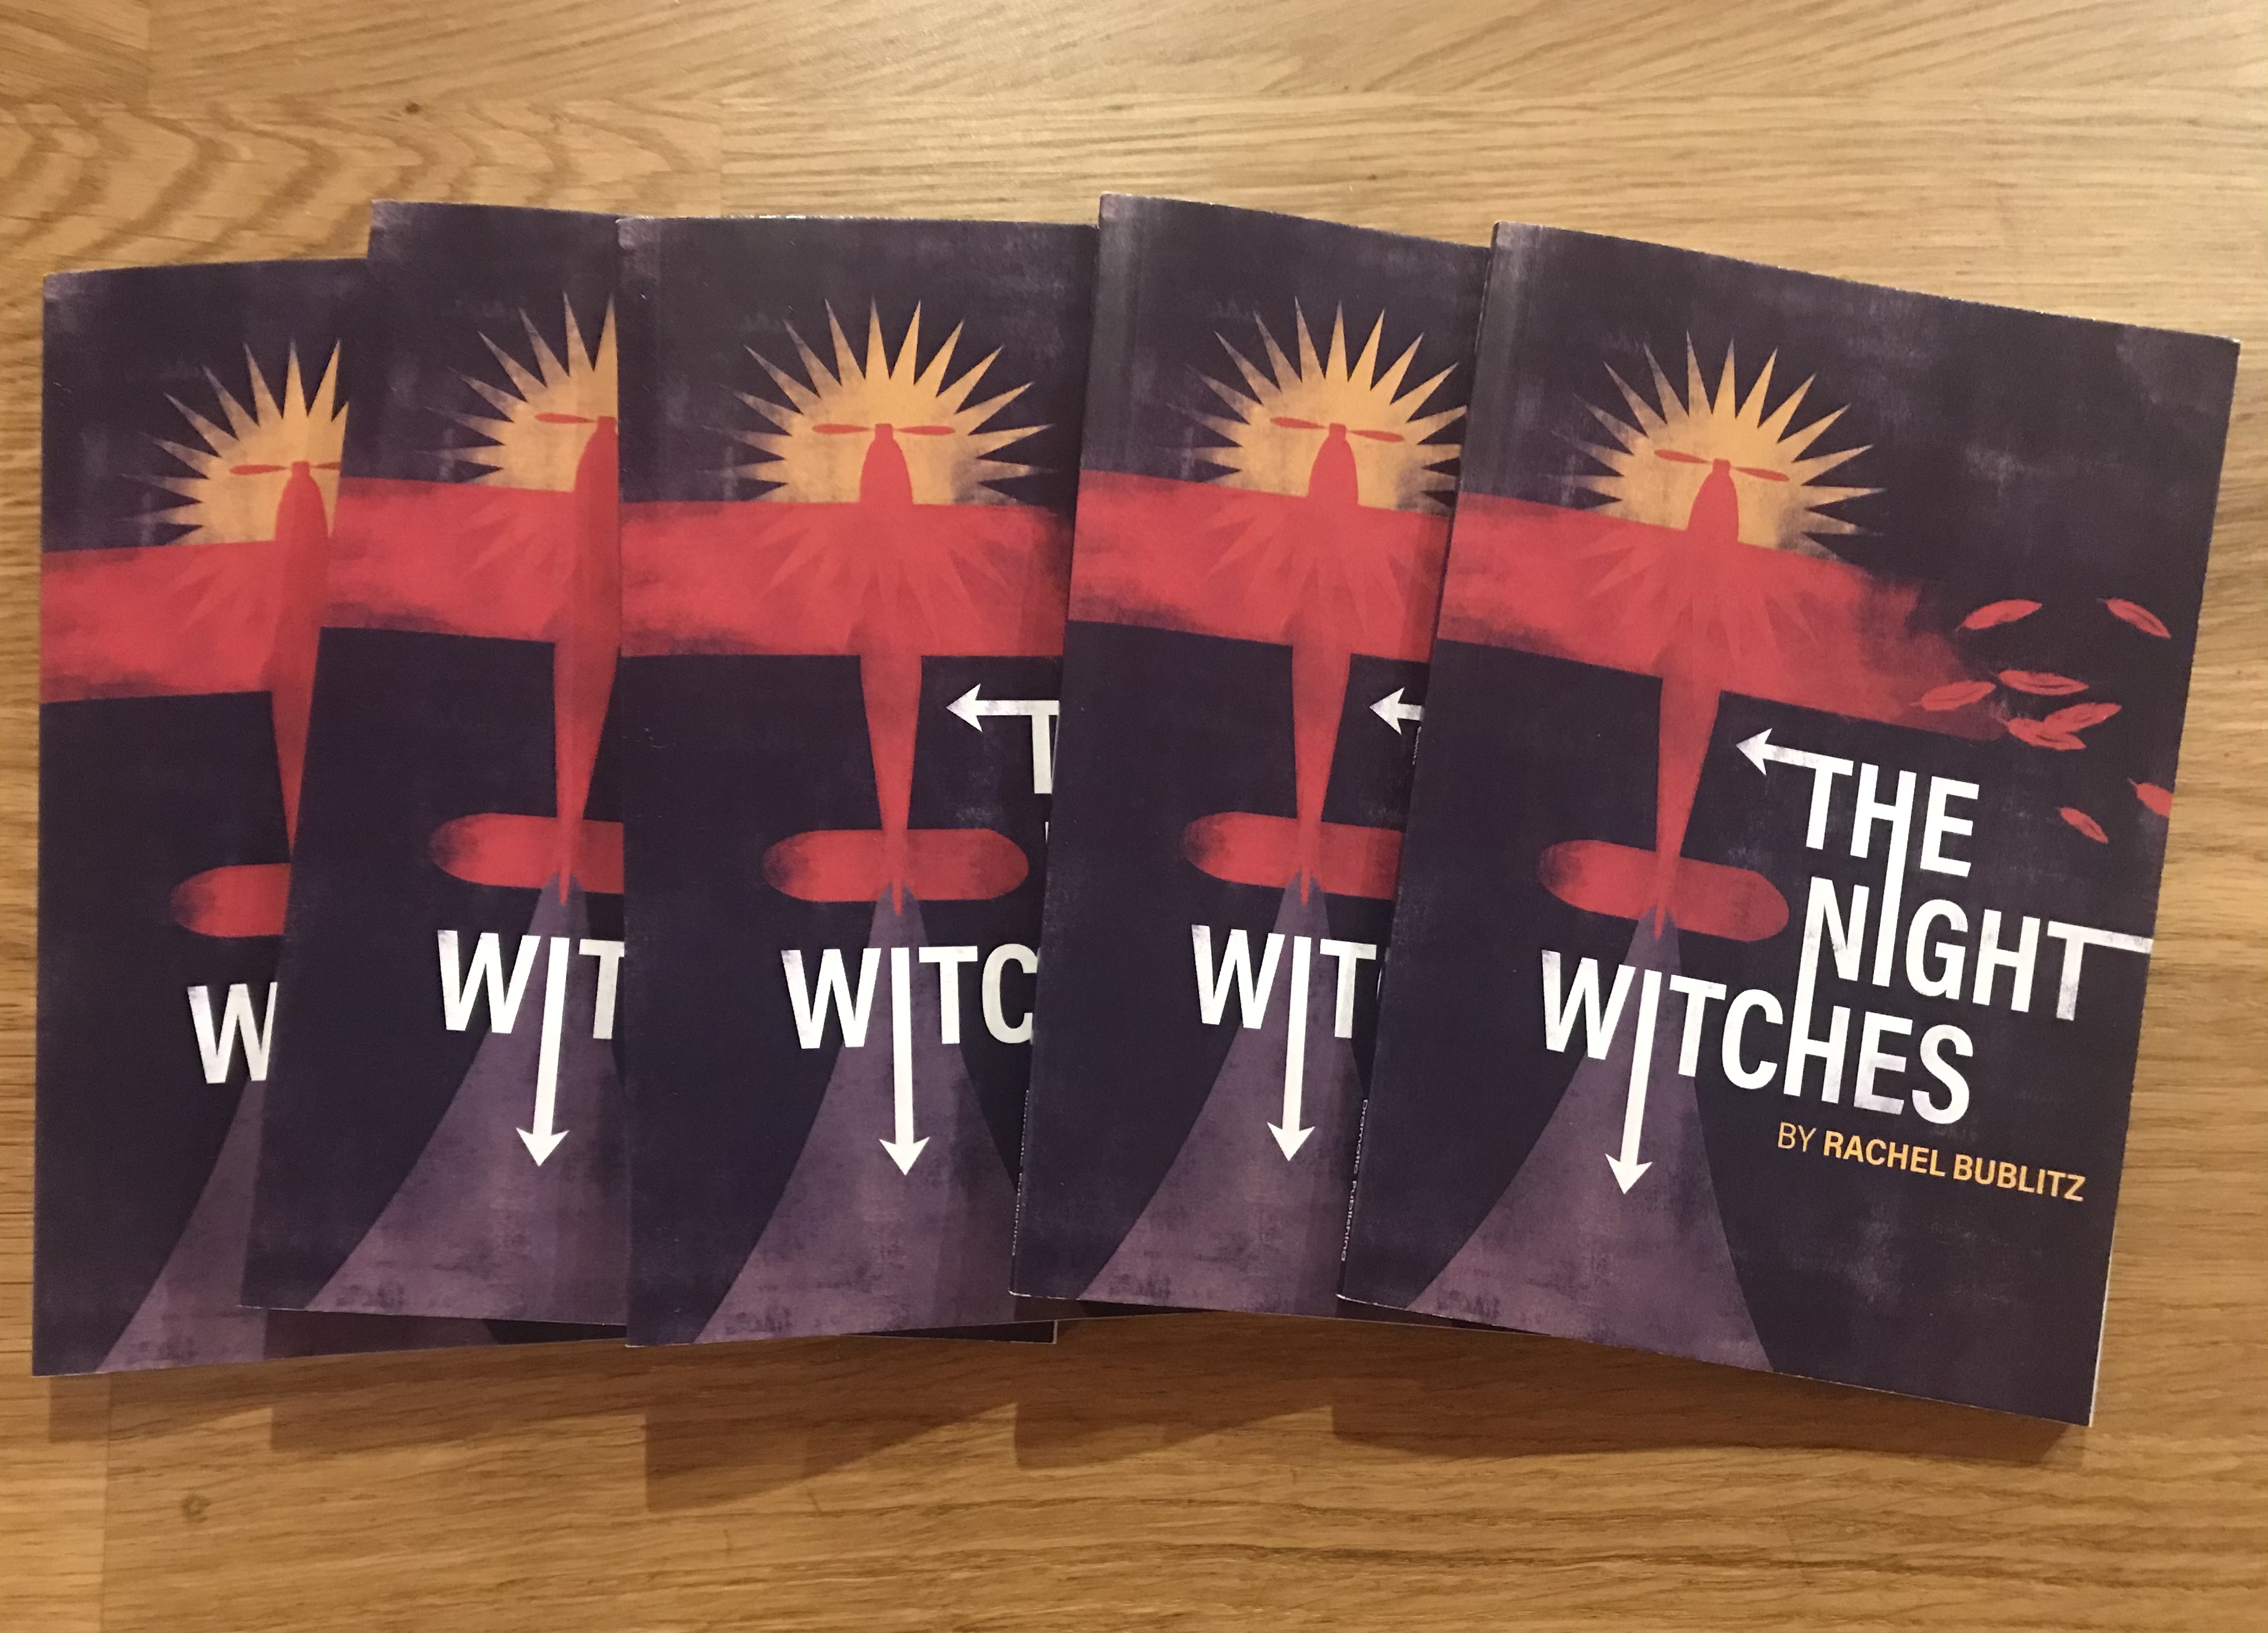 Photo of a stack of THE NIGHT WITCHES scripts from Dramatic Publishing.